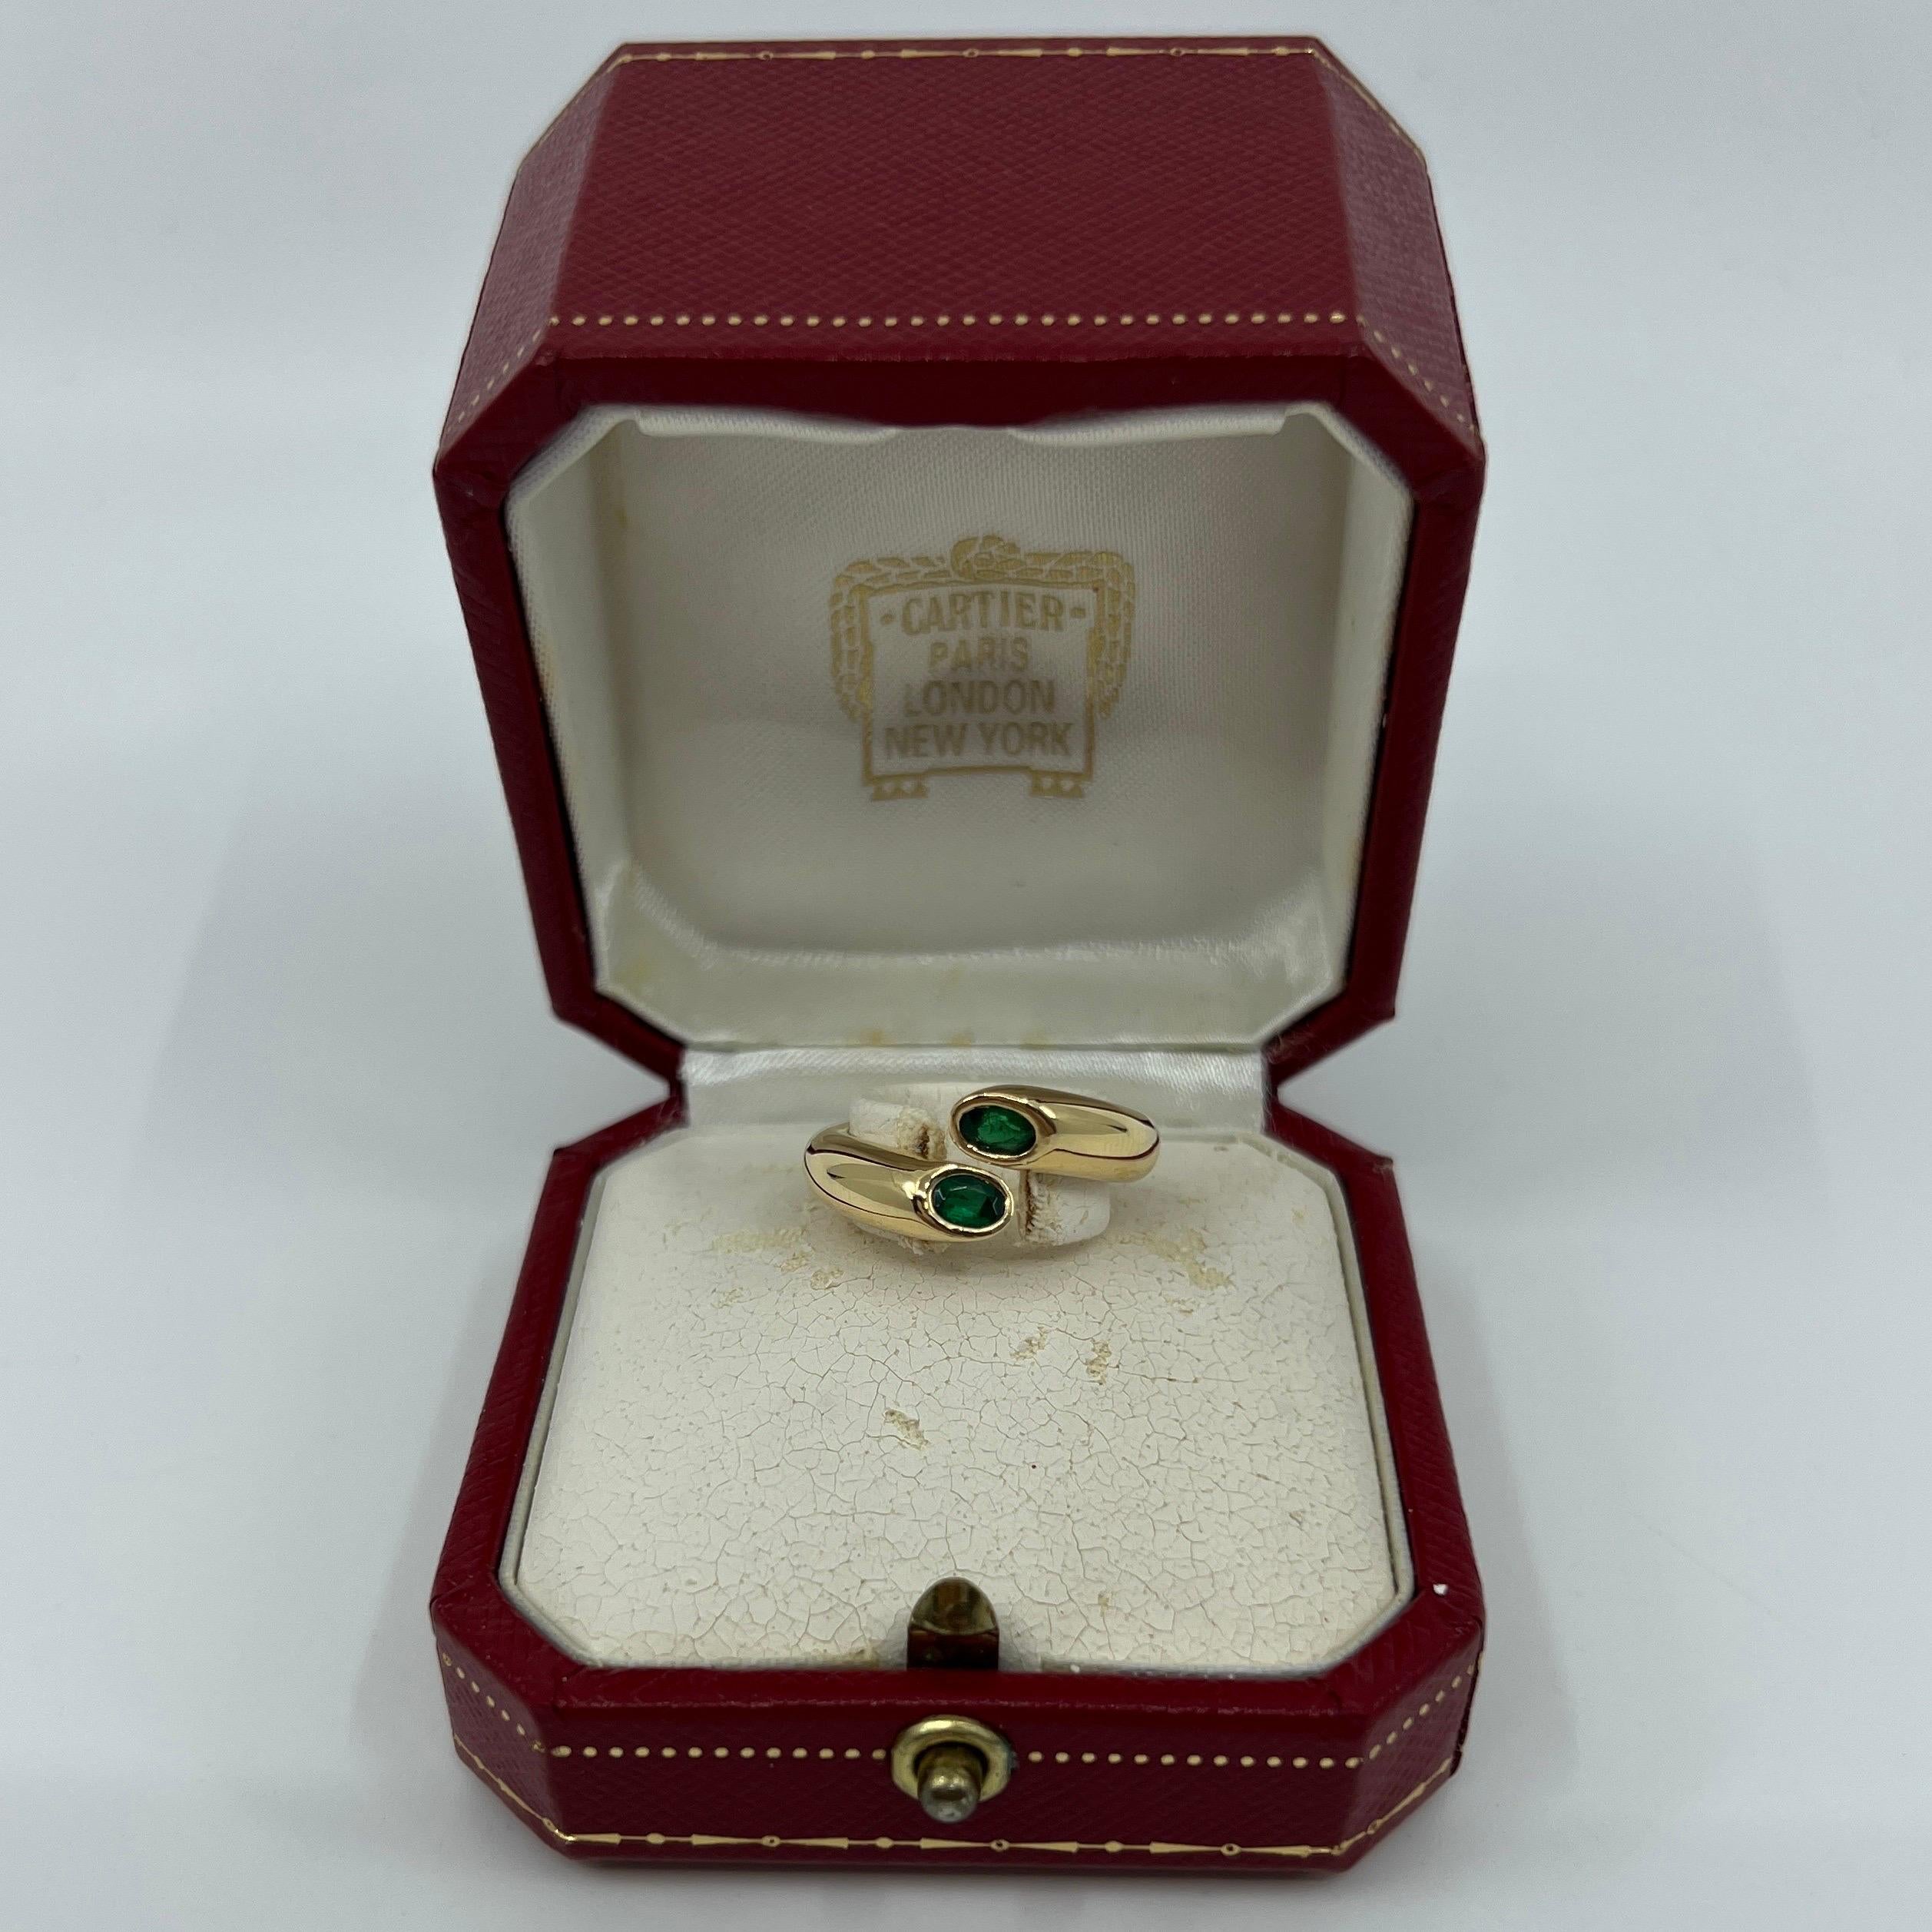 Vintage Cartier Deep Green Emerald 18k Yellow Gold Bypass Ring.

Stunning yellow gold ring set with 2 fine deep green oval cut emeralds. Fine jewellery houses like Cartier only use the finest of gemstones and these emeralds are no exception.

Two